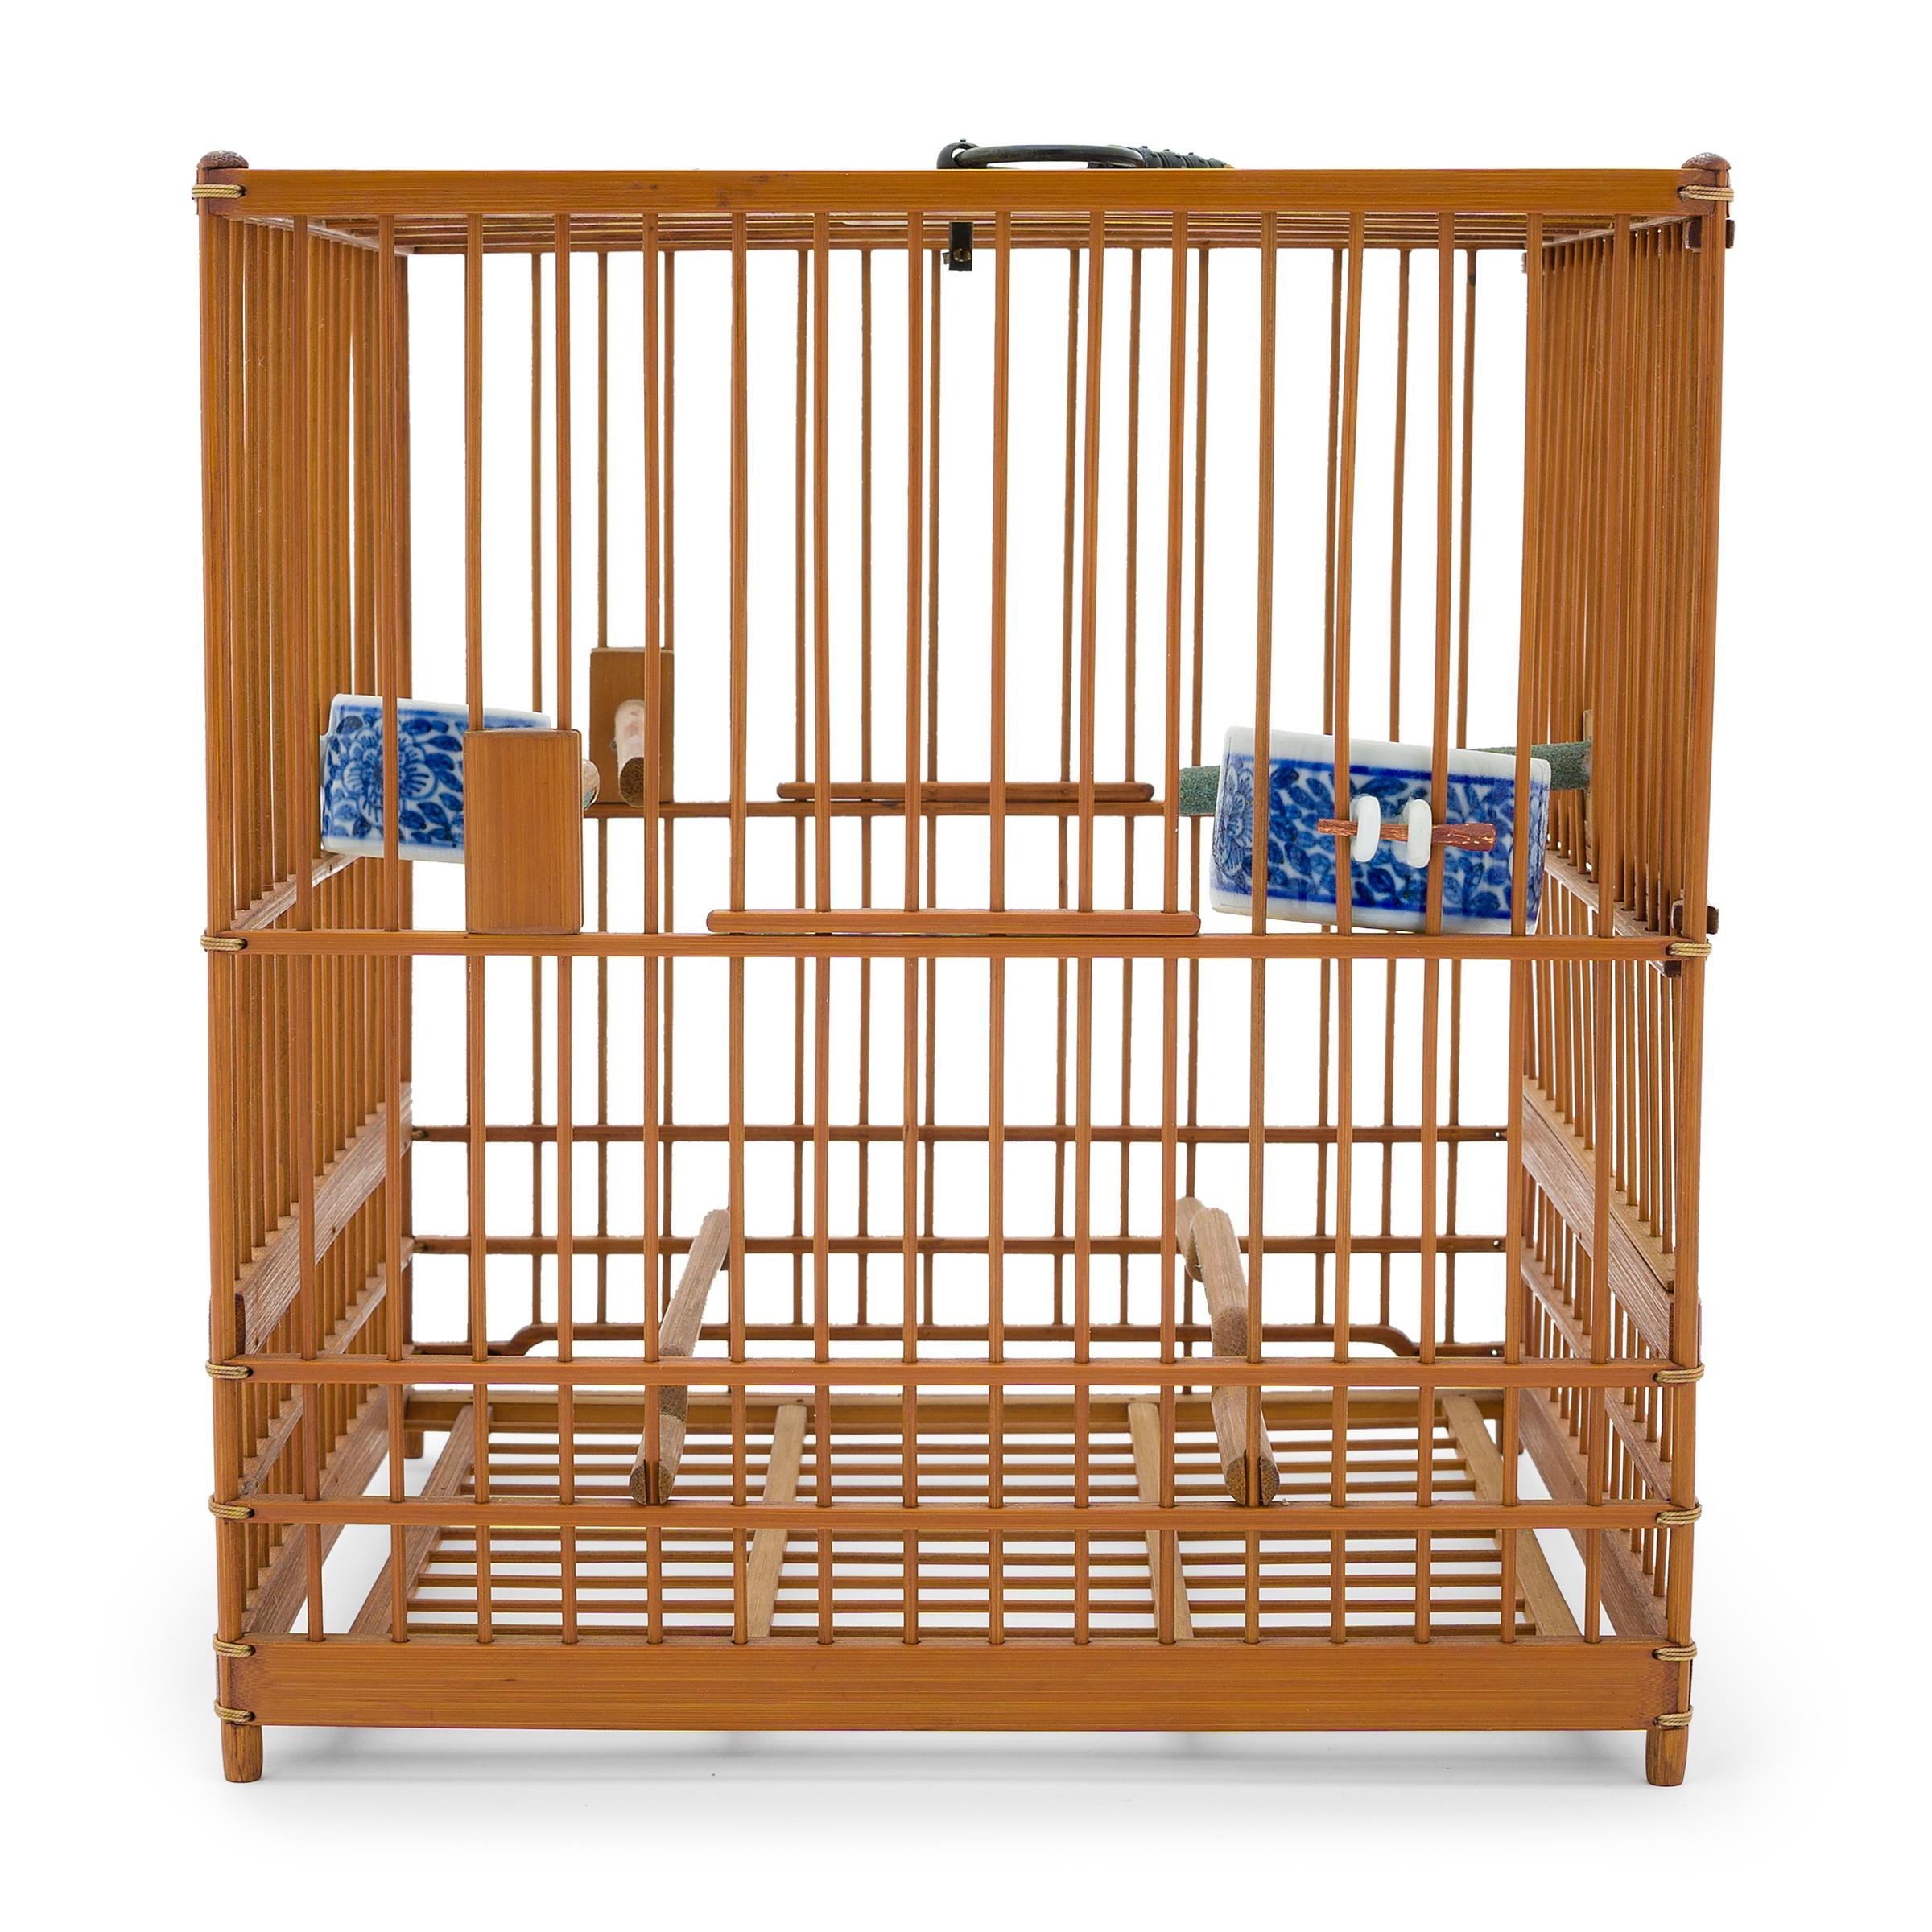 This well-proportioned birdcage is a feat of craftsmanship, carefully assembled of thin bamboo rods and held together by precise joinery and a bit of string. Two humpback perches run the length of the cage at the bottom, surmounted by three shorter